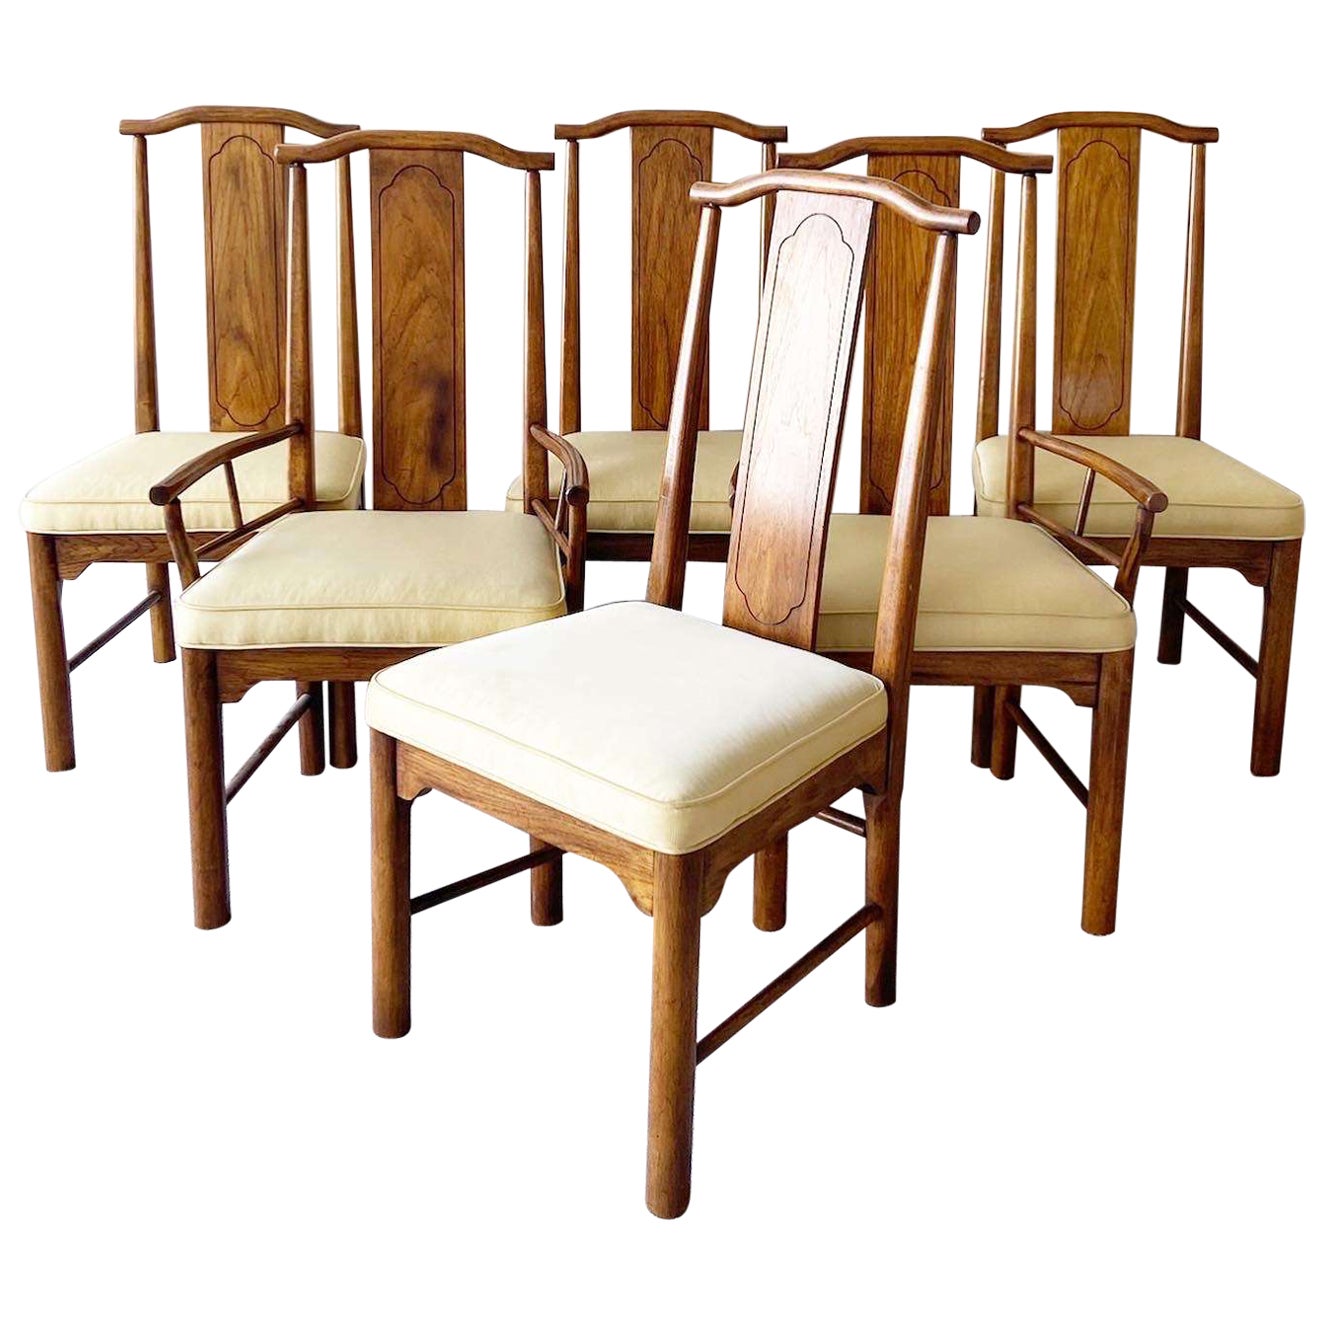 Vintage Chinoiserie Wooden Dining Chairs - Set of 6 For Sale